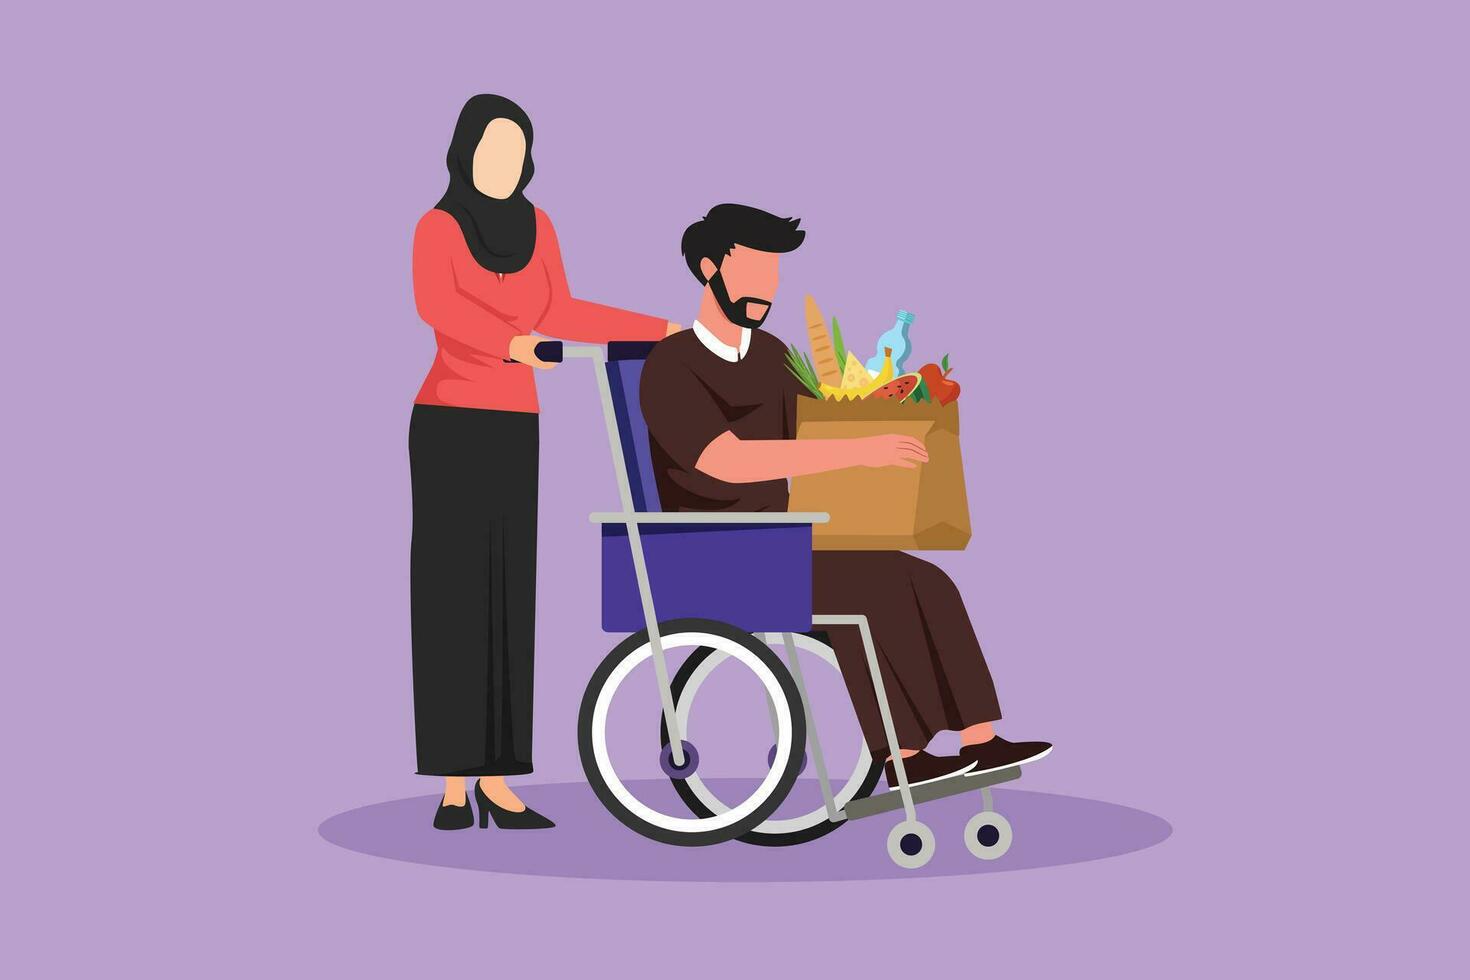 Cartoon flat style drawing social worker helping old man on wheelchair with grocery bag. Arab female volunteer caring, walking with disabled senior male to shopping. Graphic design vector illustration